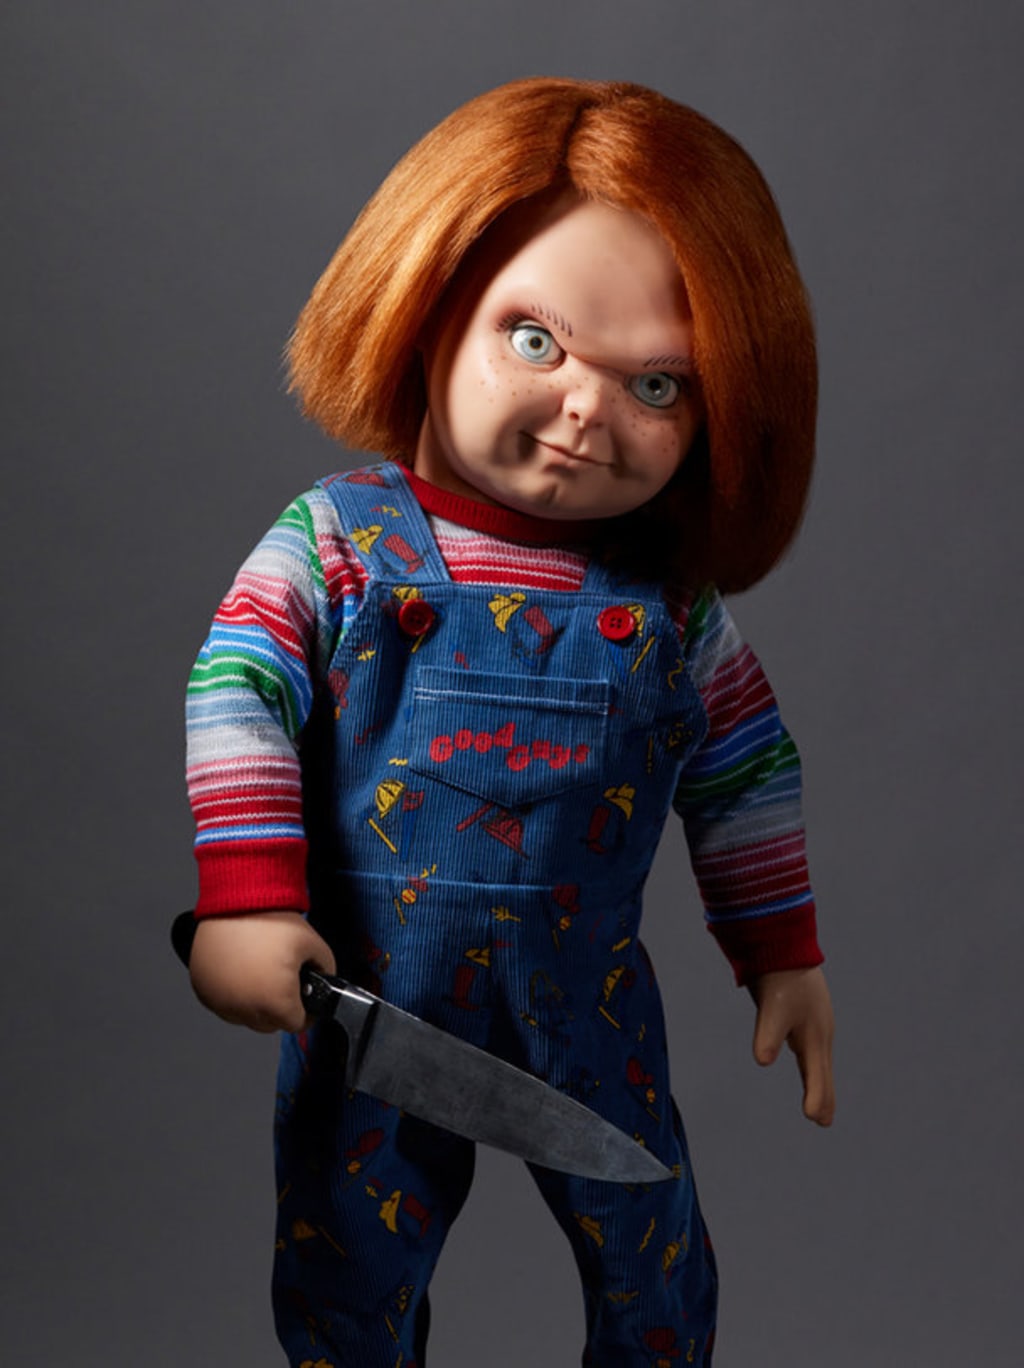 Story about Chucky: A Doll with a Deadly Secret | Horror